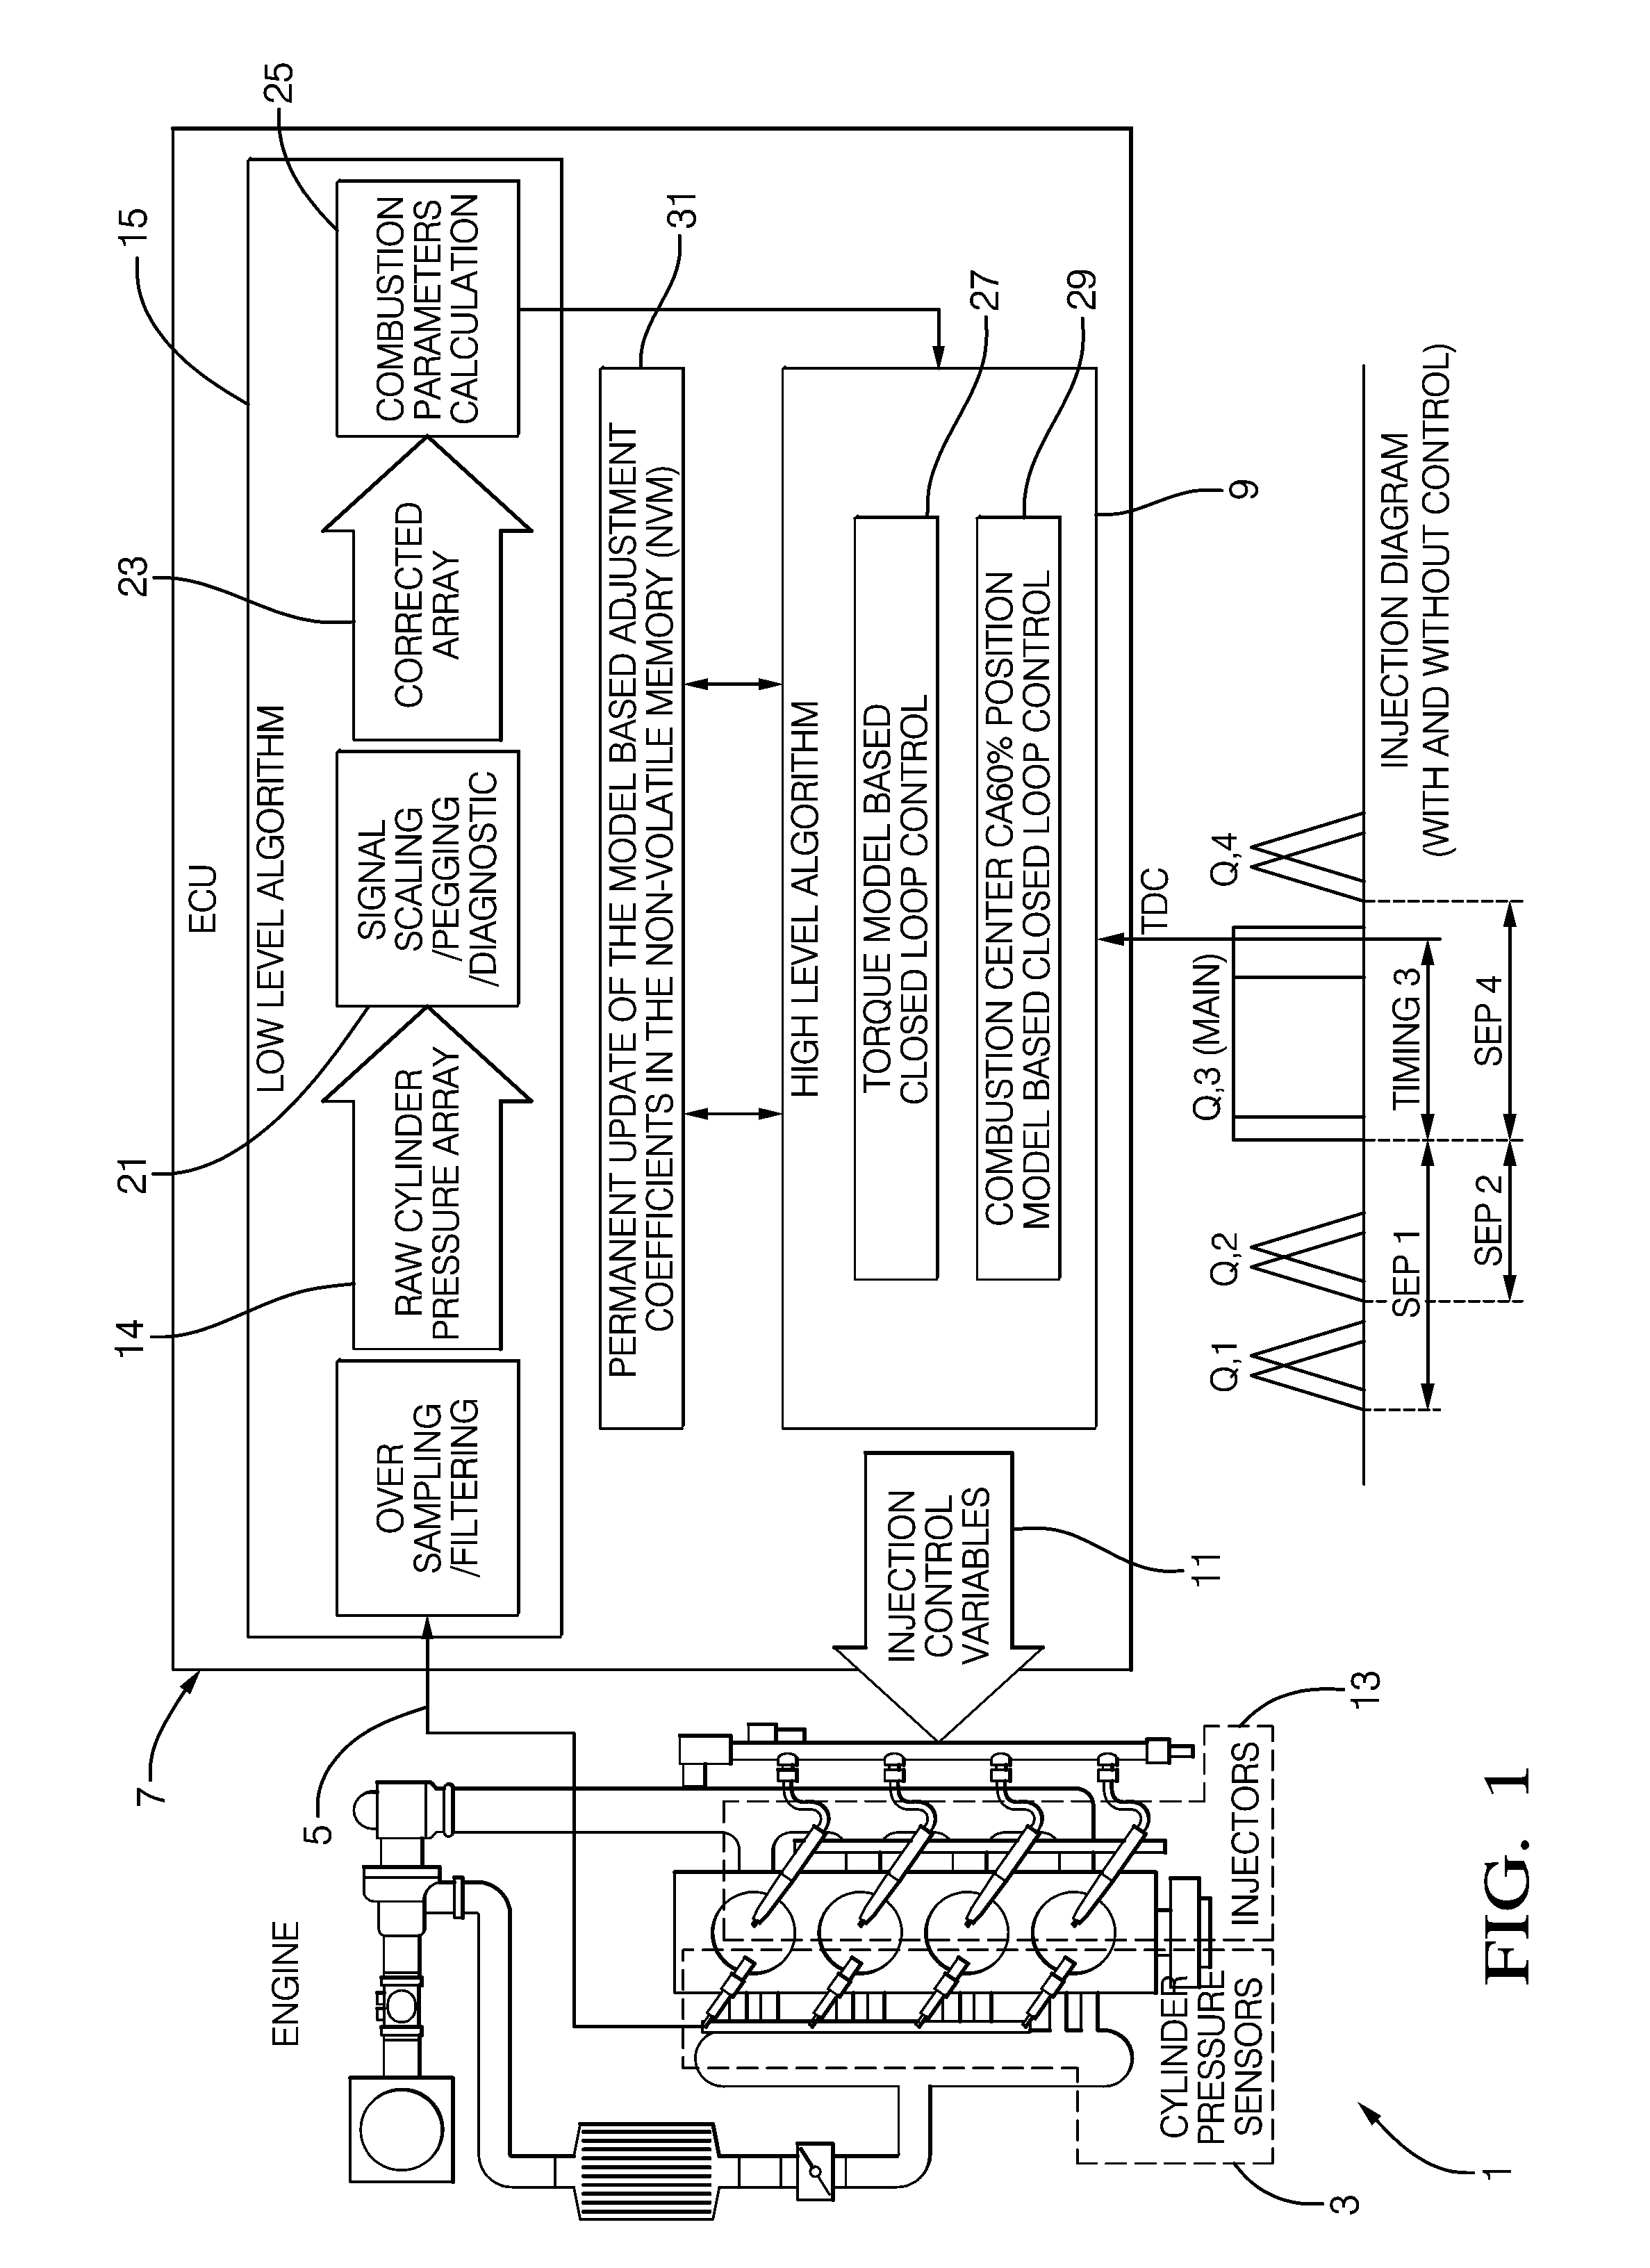 Engine control system and method